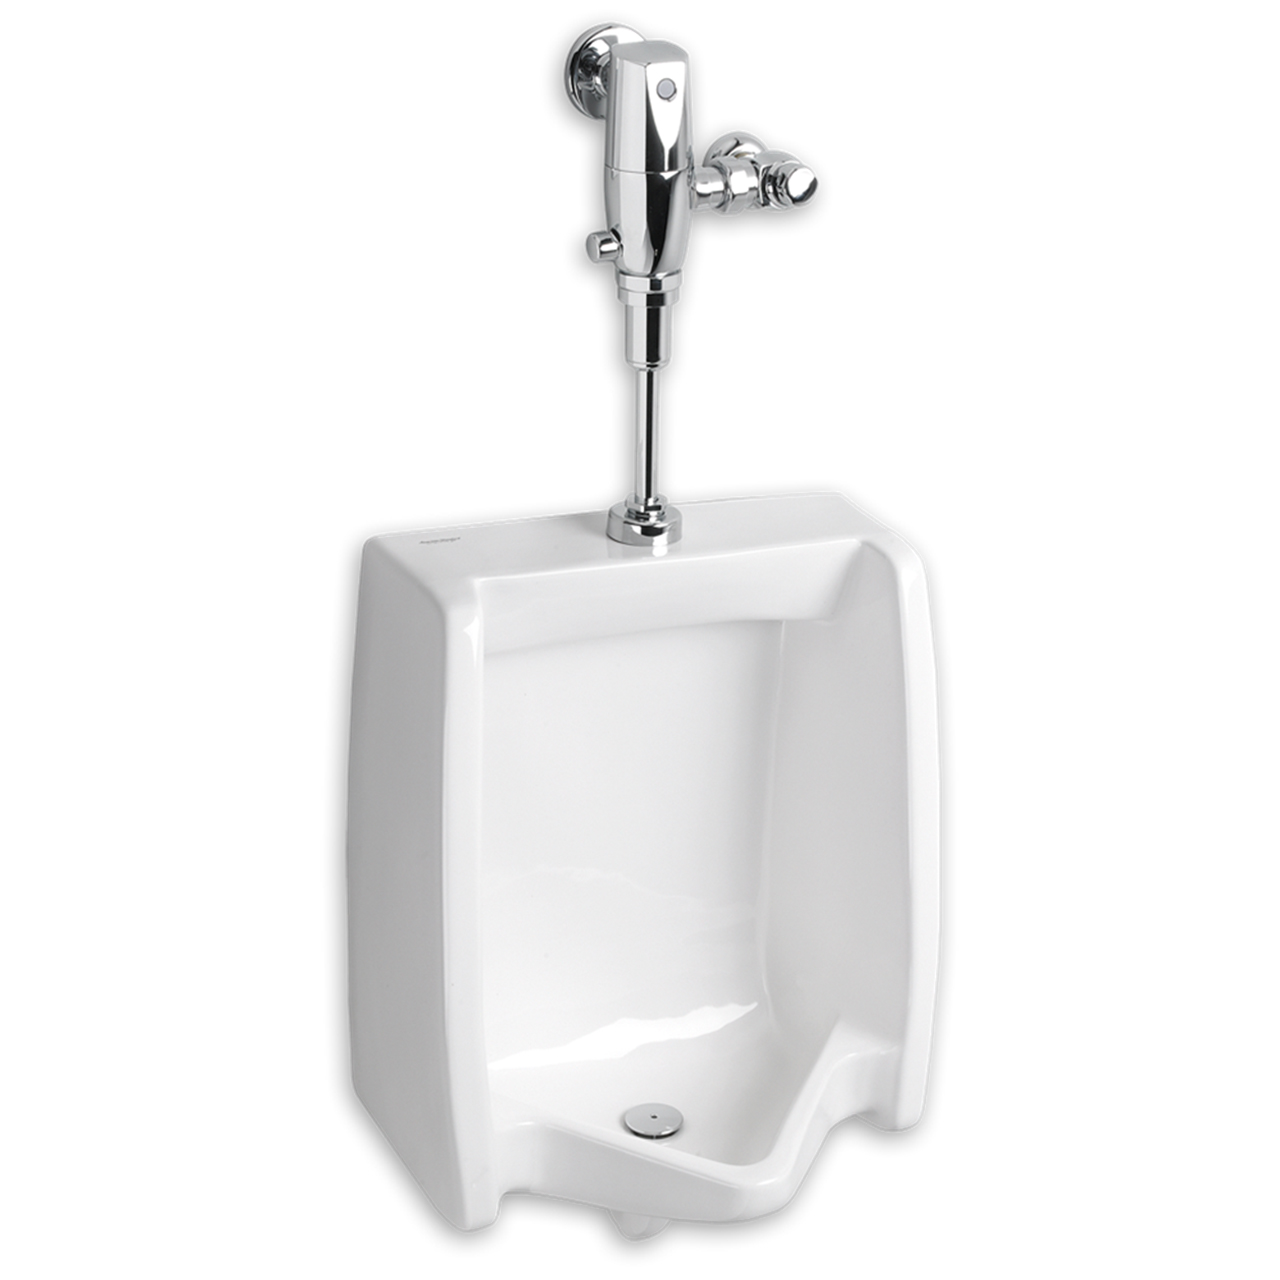 Washbrook FloWise Universal Urinal in White w/EverClean